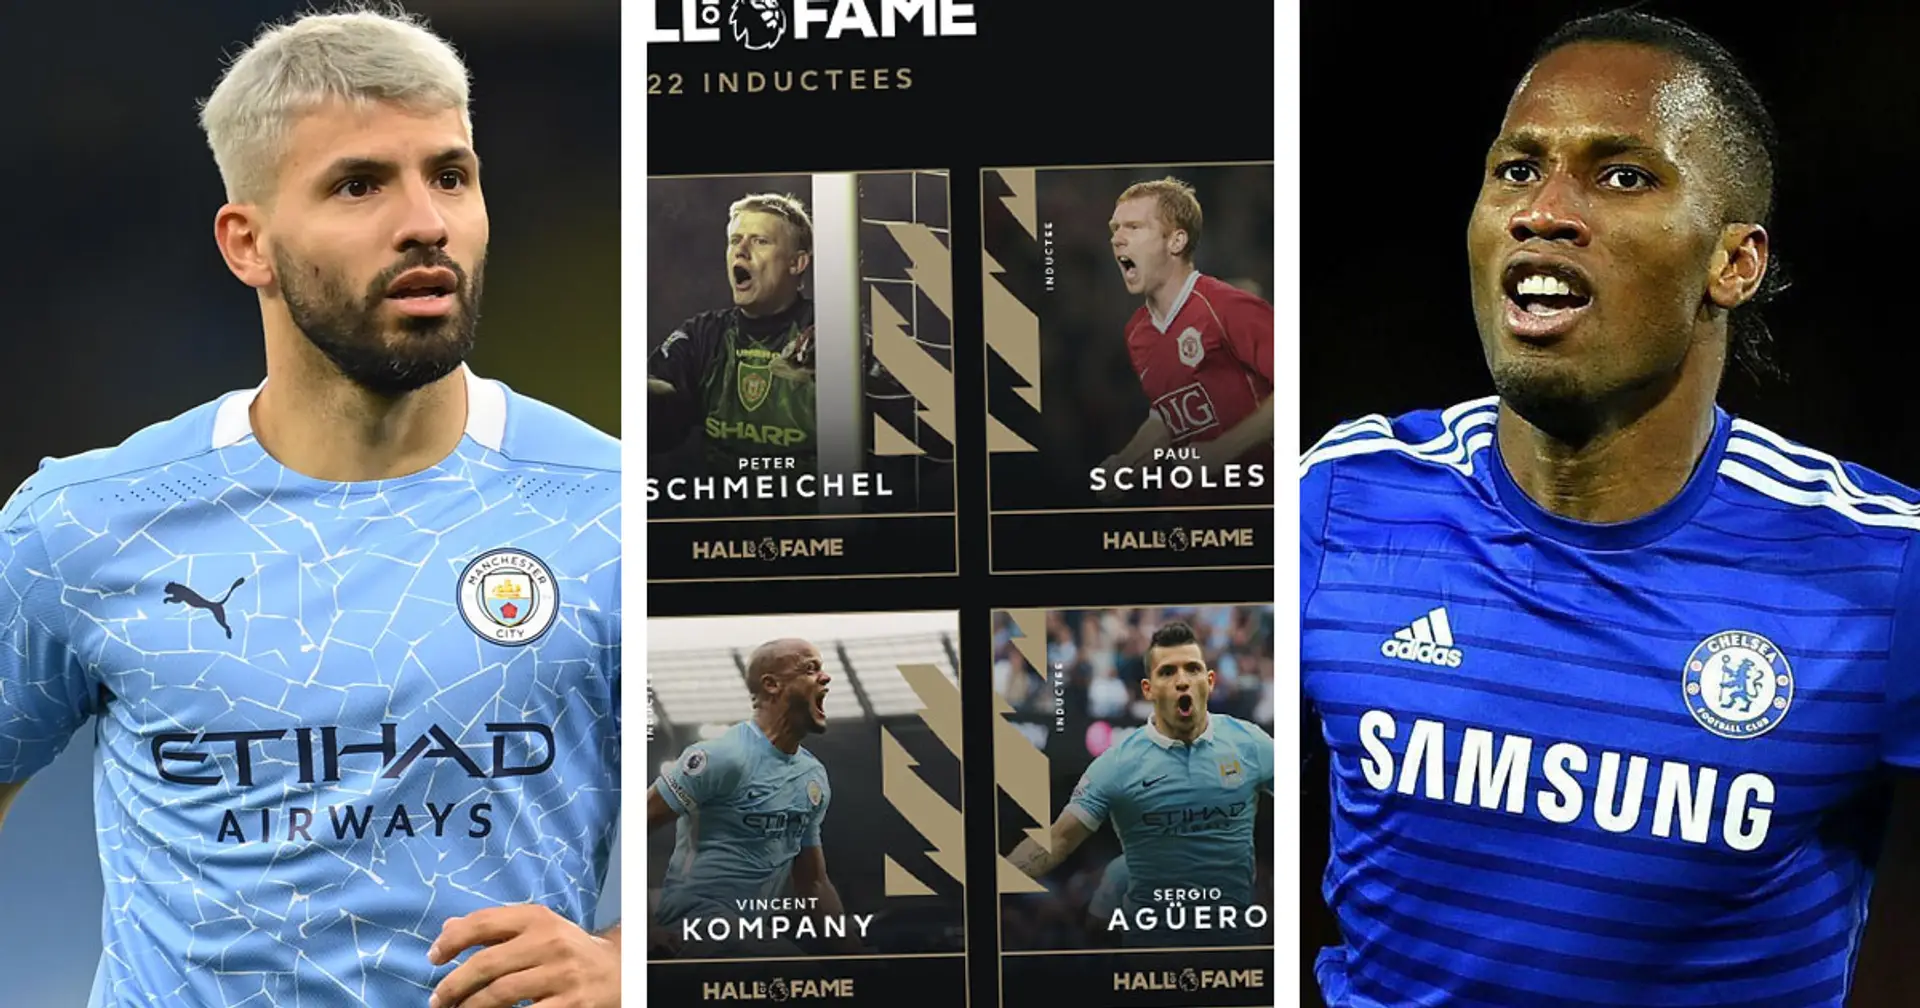 Sergio Aguero, Didier Drogba & 4 others inducted into Premier League Hall of Fame